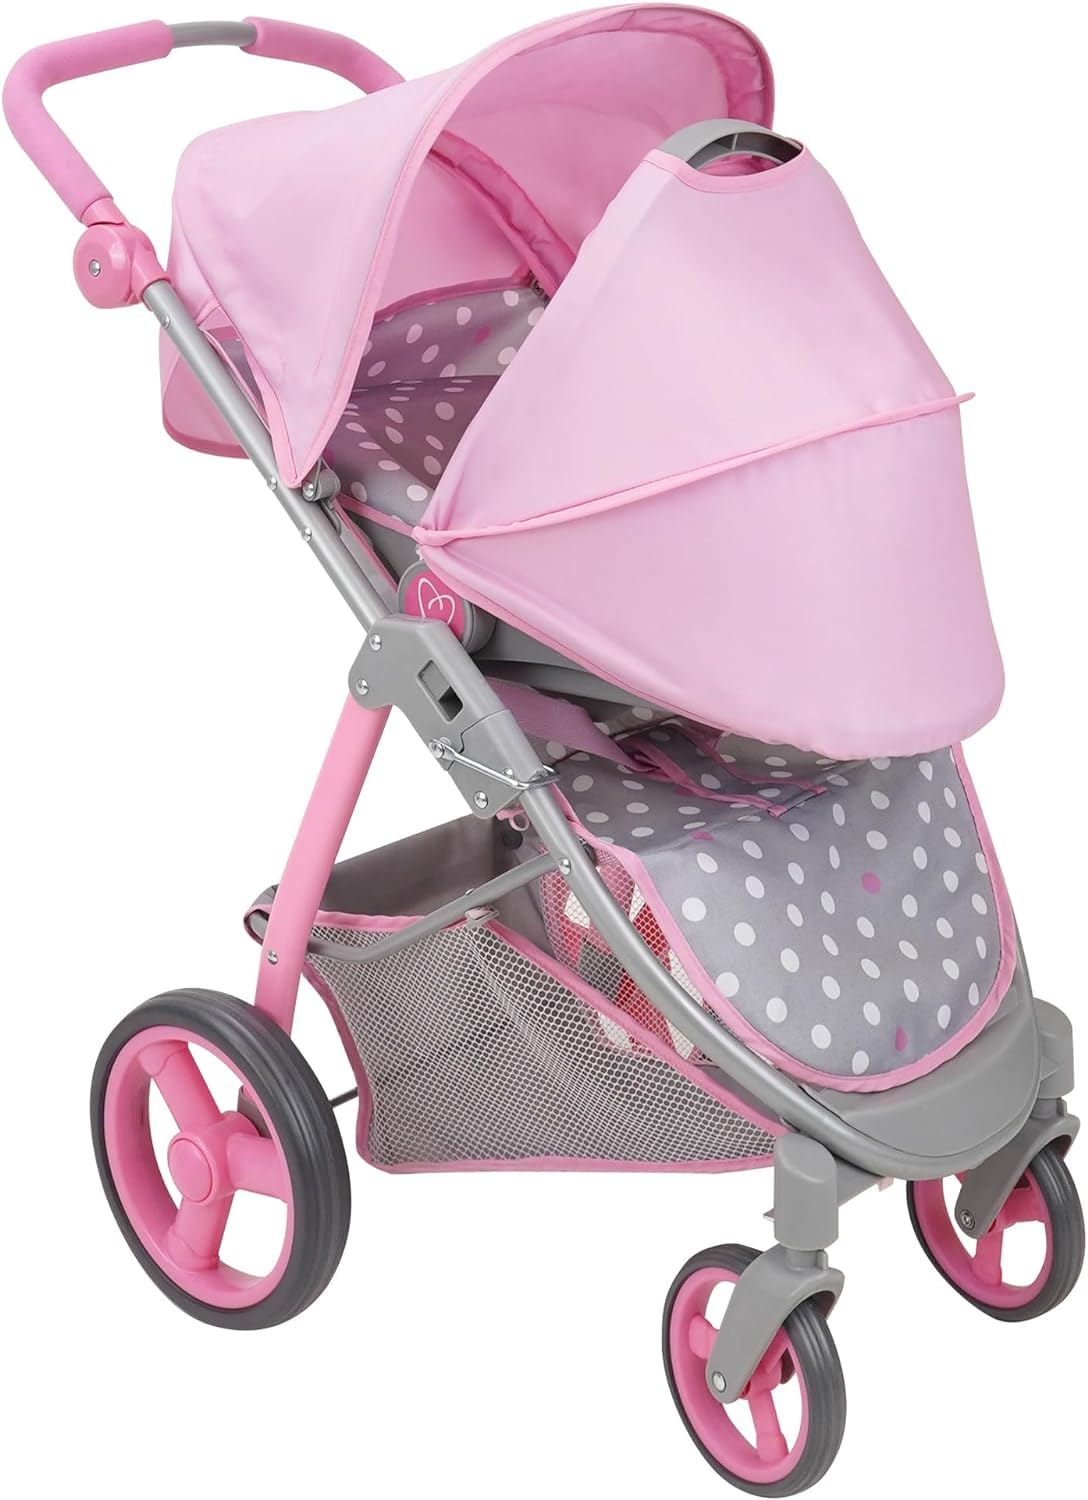 509 Crew: Cotton Candy Pink: Doll Travel System - Pink, Grey, Polka Dot -for Dolls Up to 18